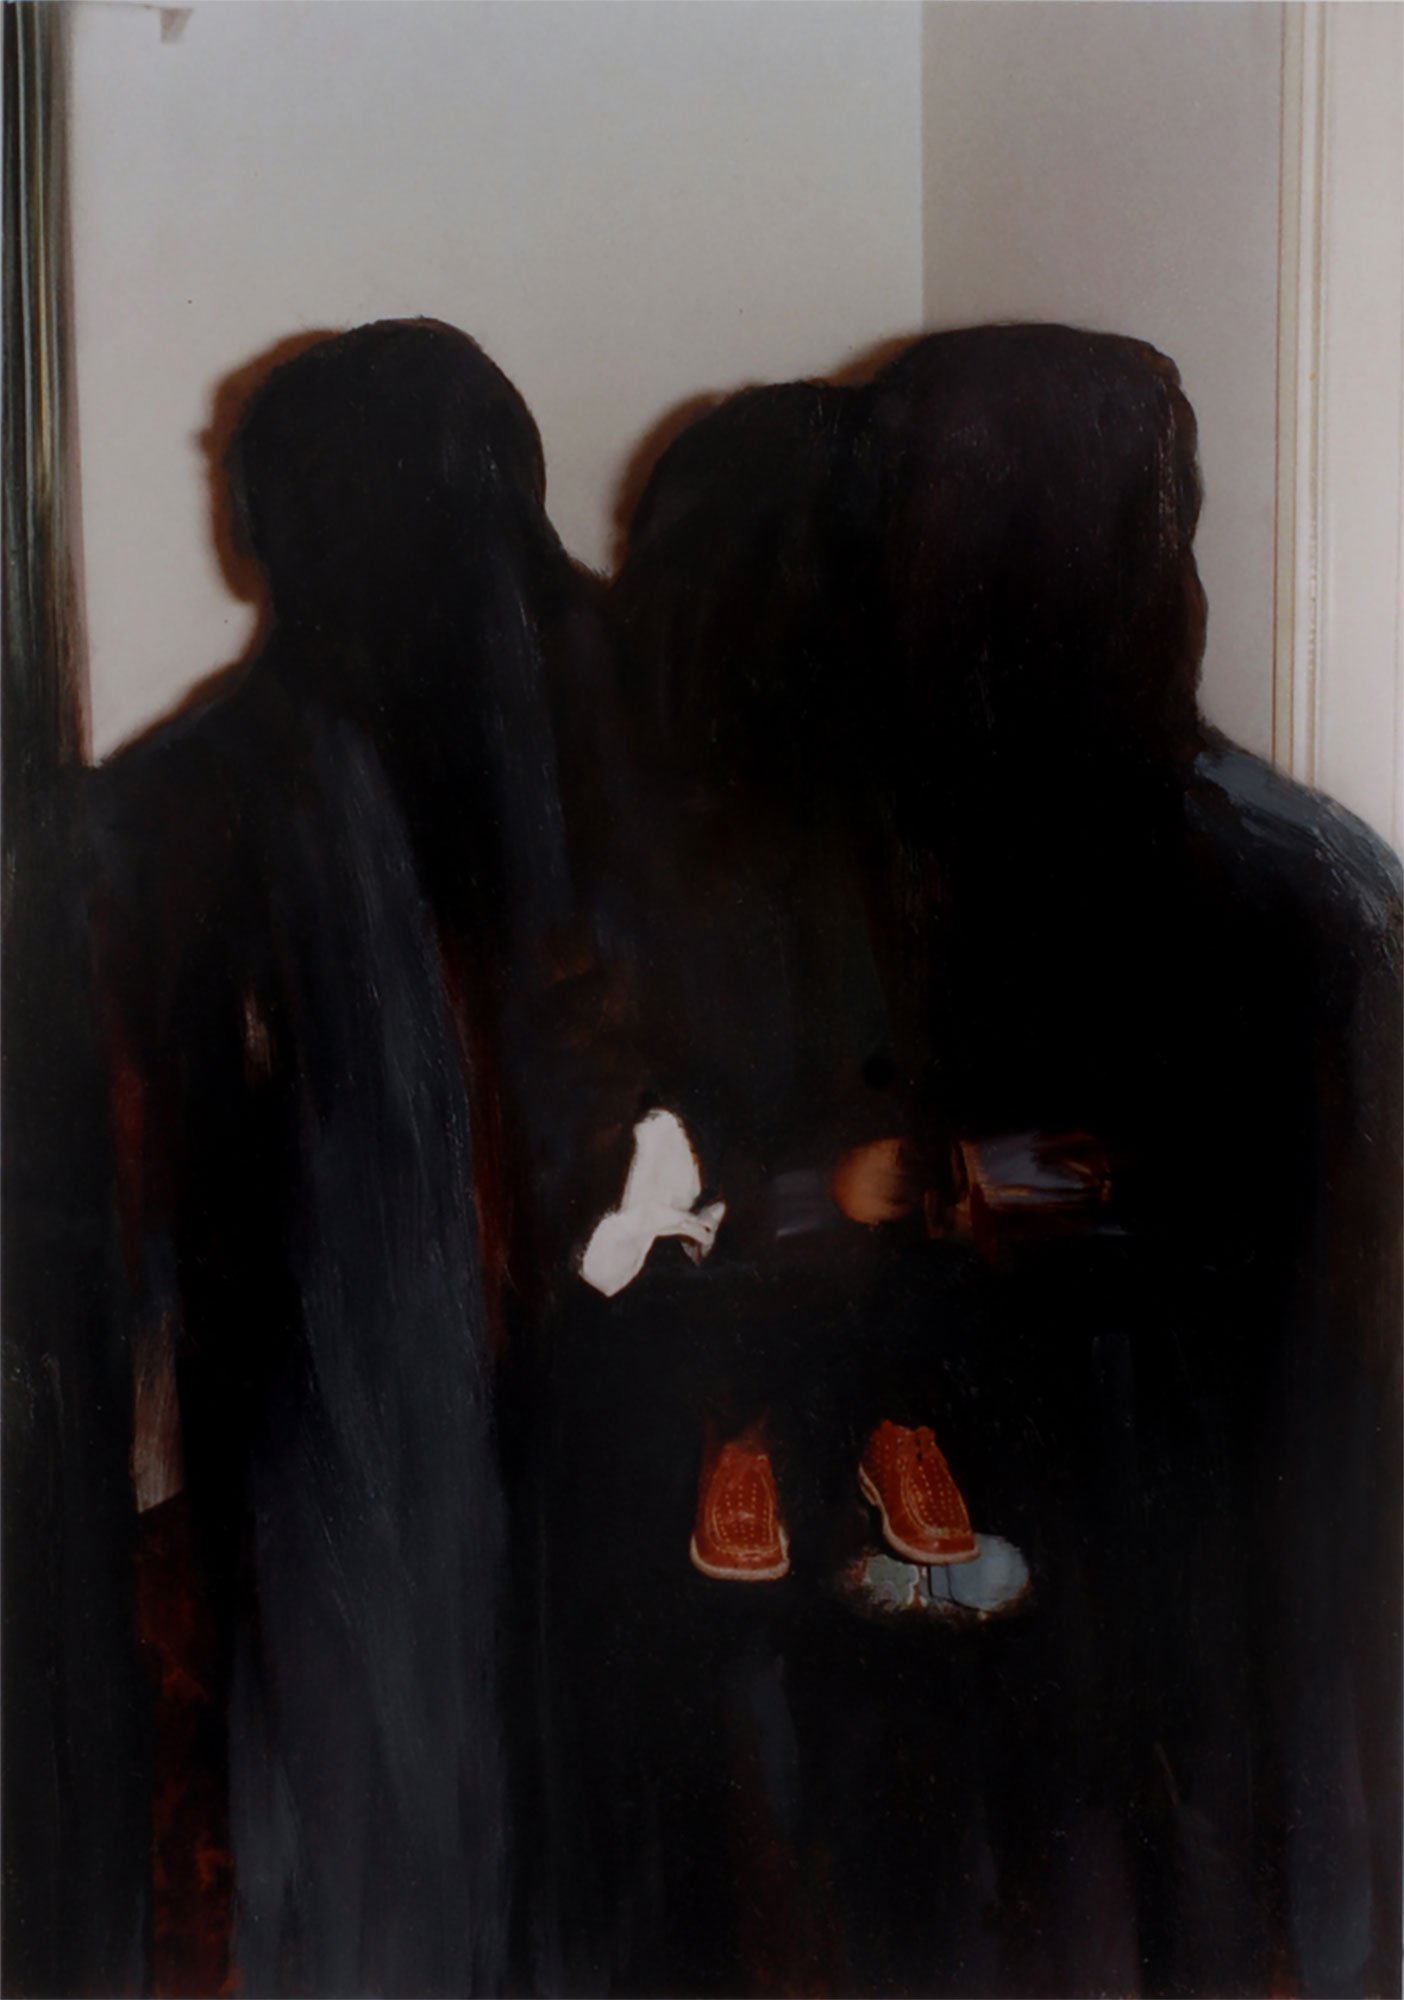 Eftihis Patsourakis, Erase #2.9, painting on found photograph, dimensions variable, 2008